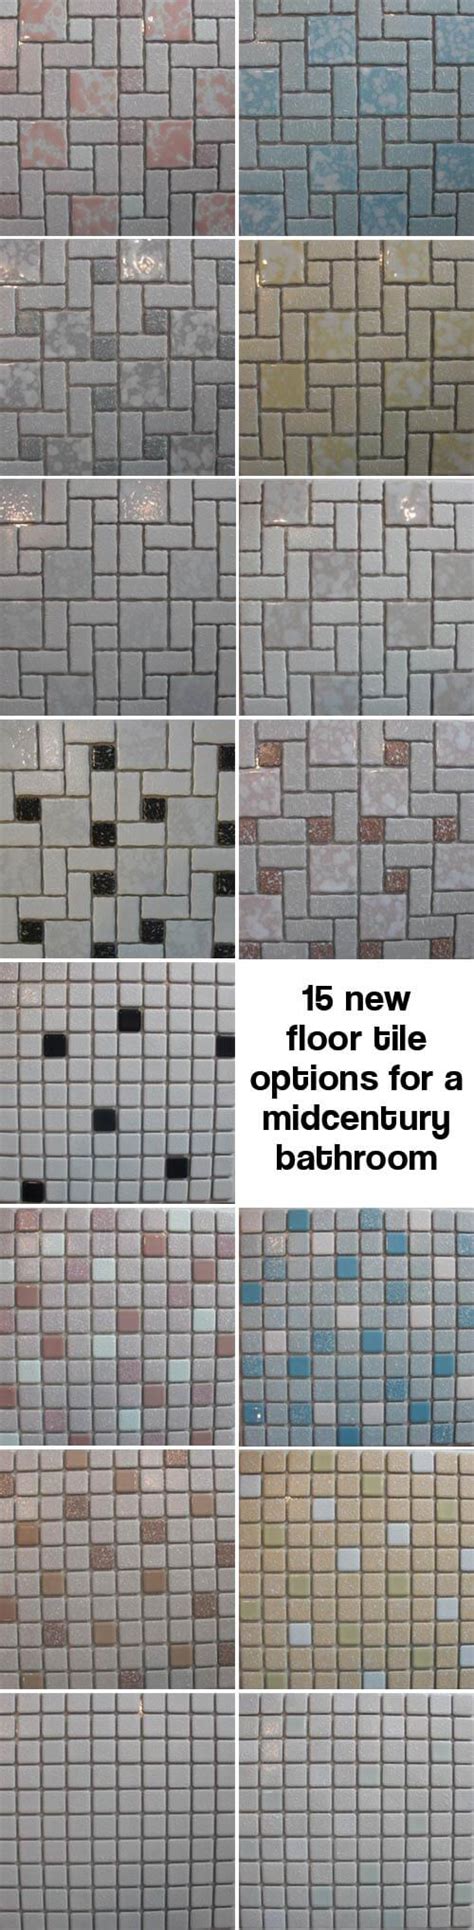 It can sound daunting, but we'll show you the equipment & planning to keep it straightforward. Bathroom floor tile in production since the 1970s - 6 ...